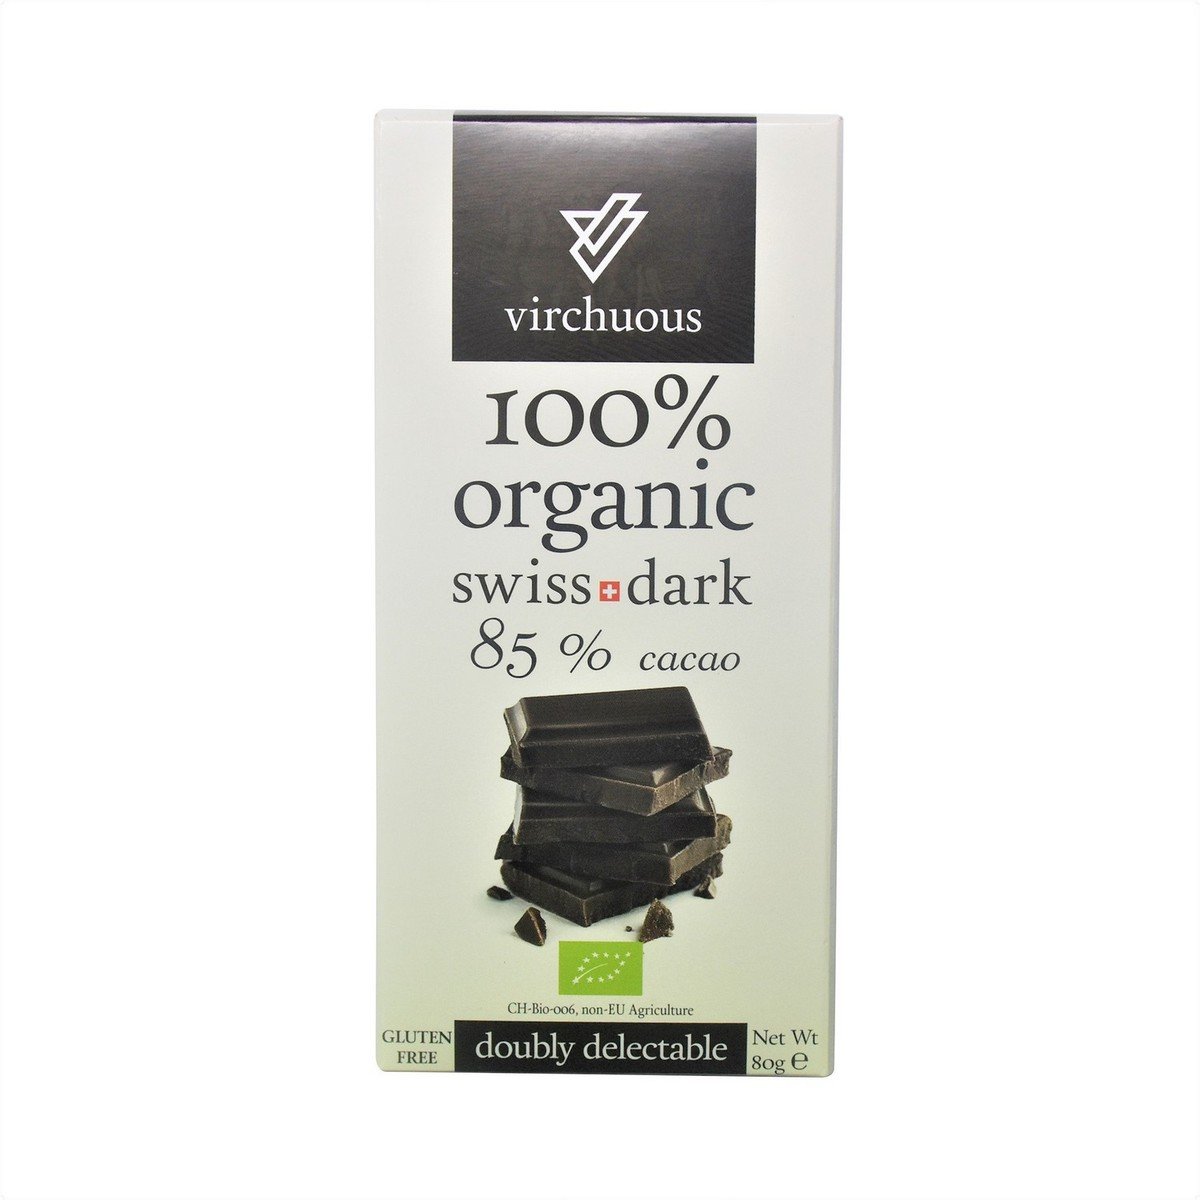 Virchuous 100% Organic Swiss Dark Chocolate with 85% Cacao Gluten Free 80g